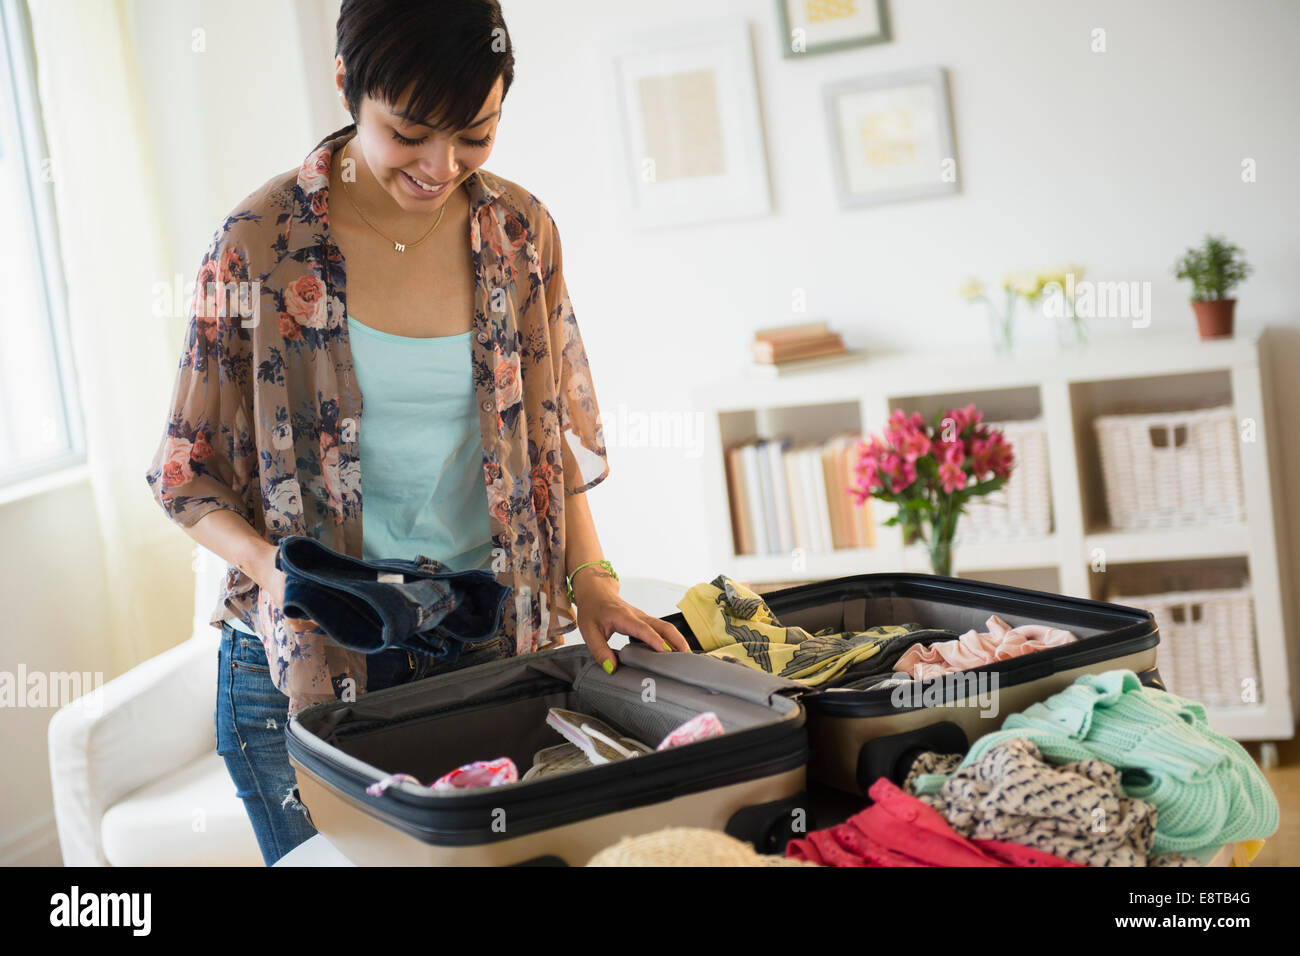 Packing suitcase at home with woman items, accessories, Stock image